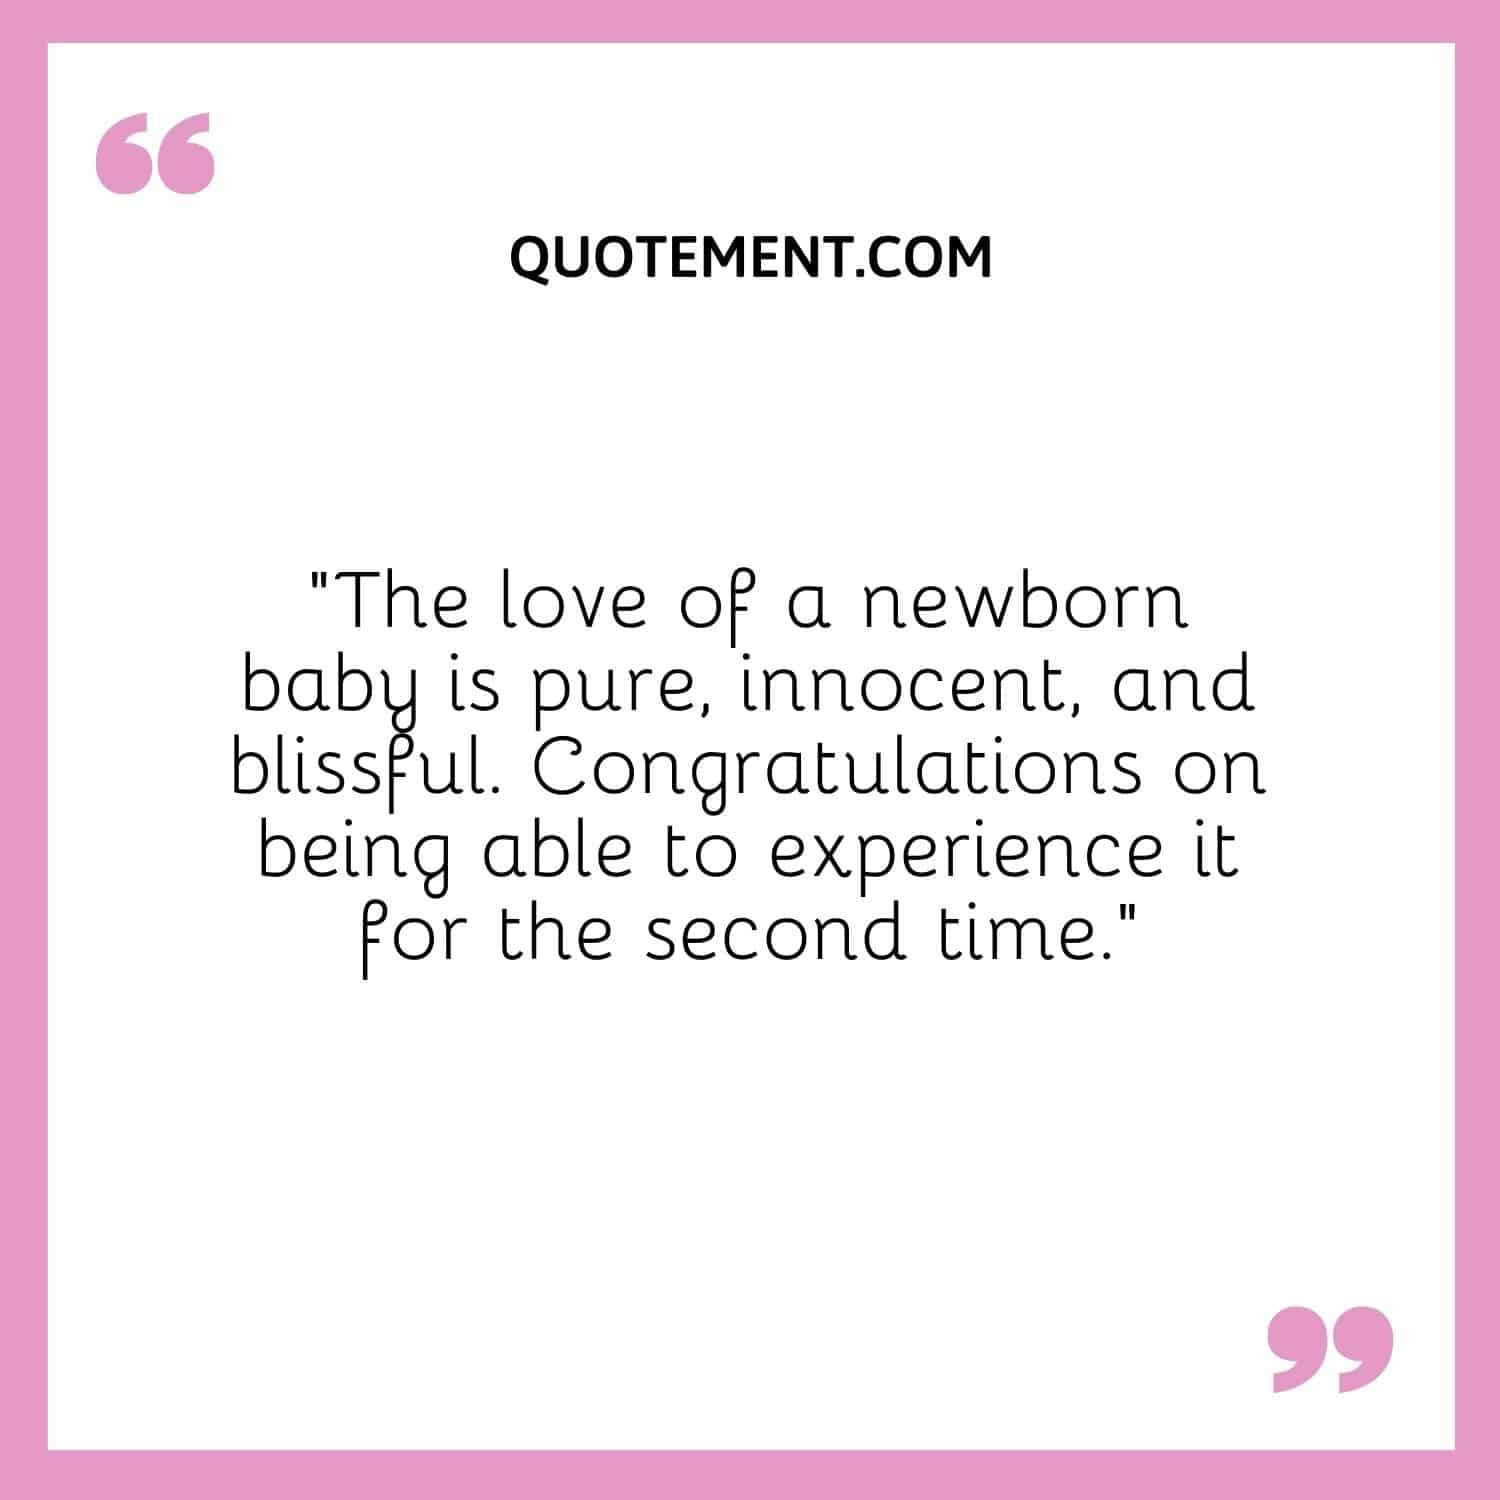 The love of a newborn baby is pure, innocent, and blissful.